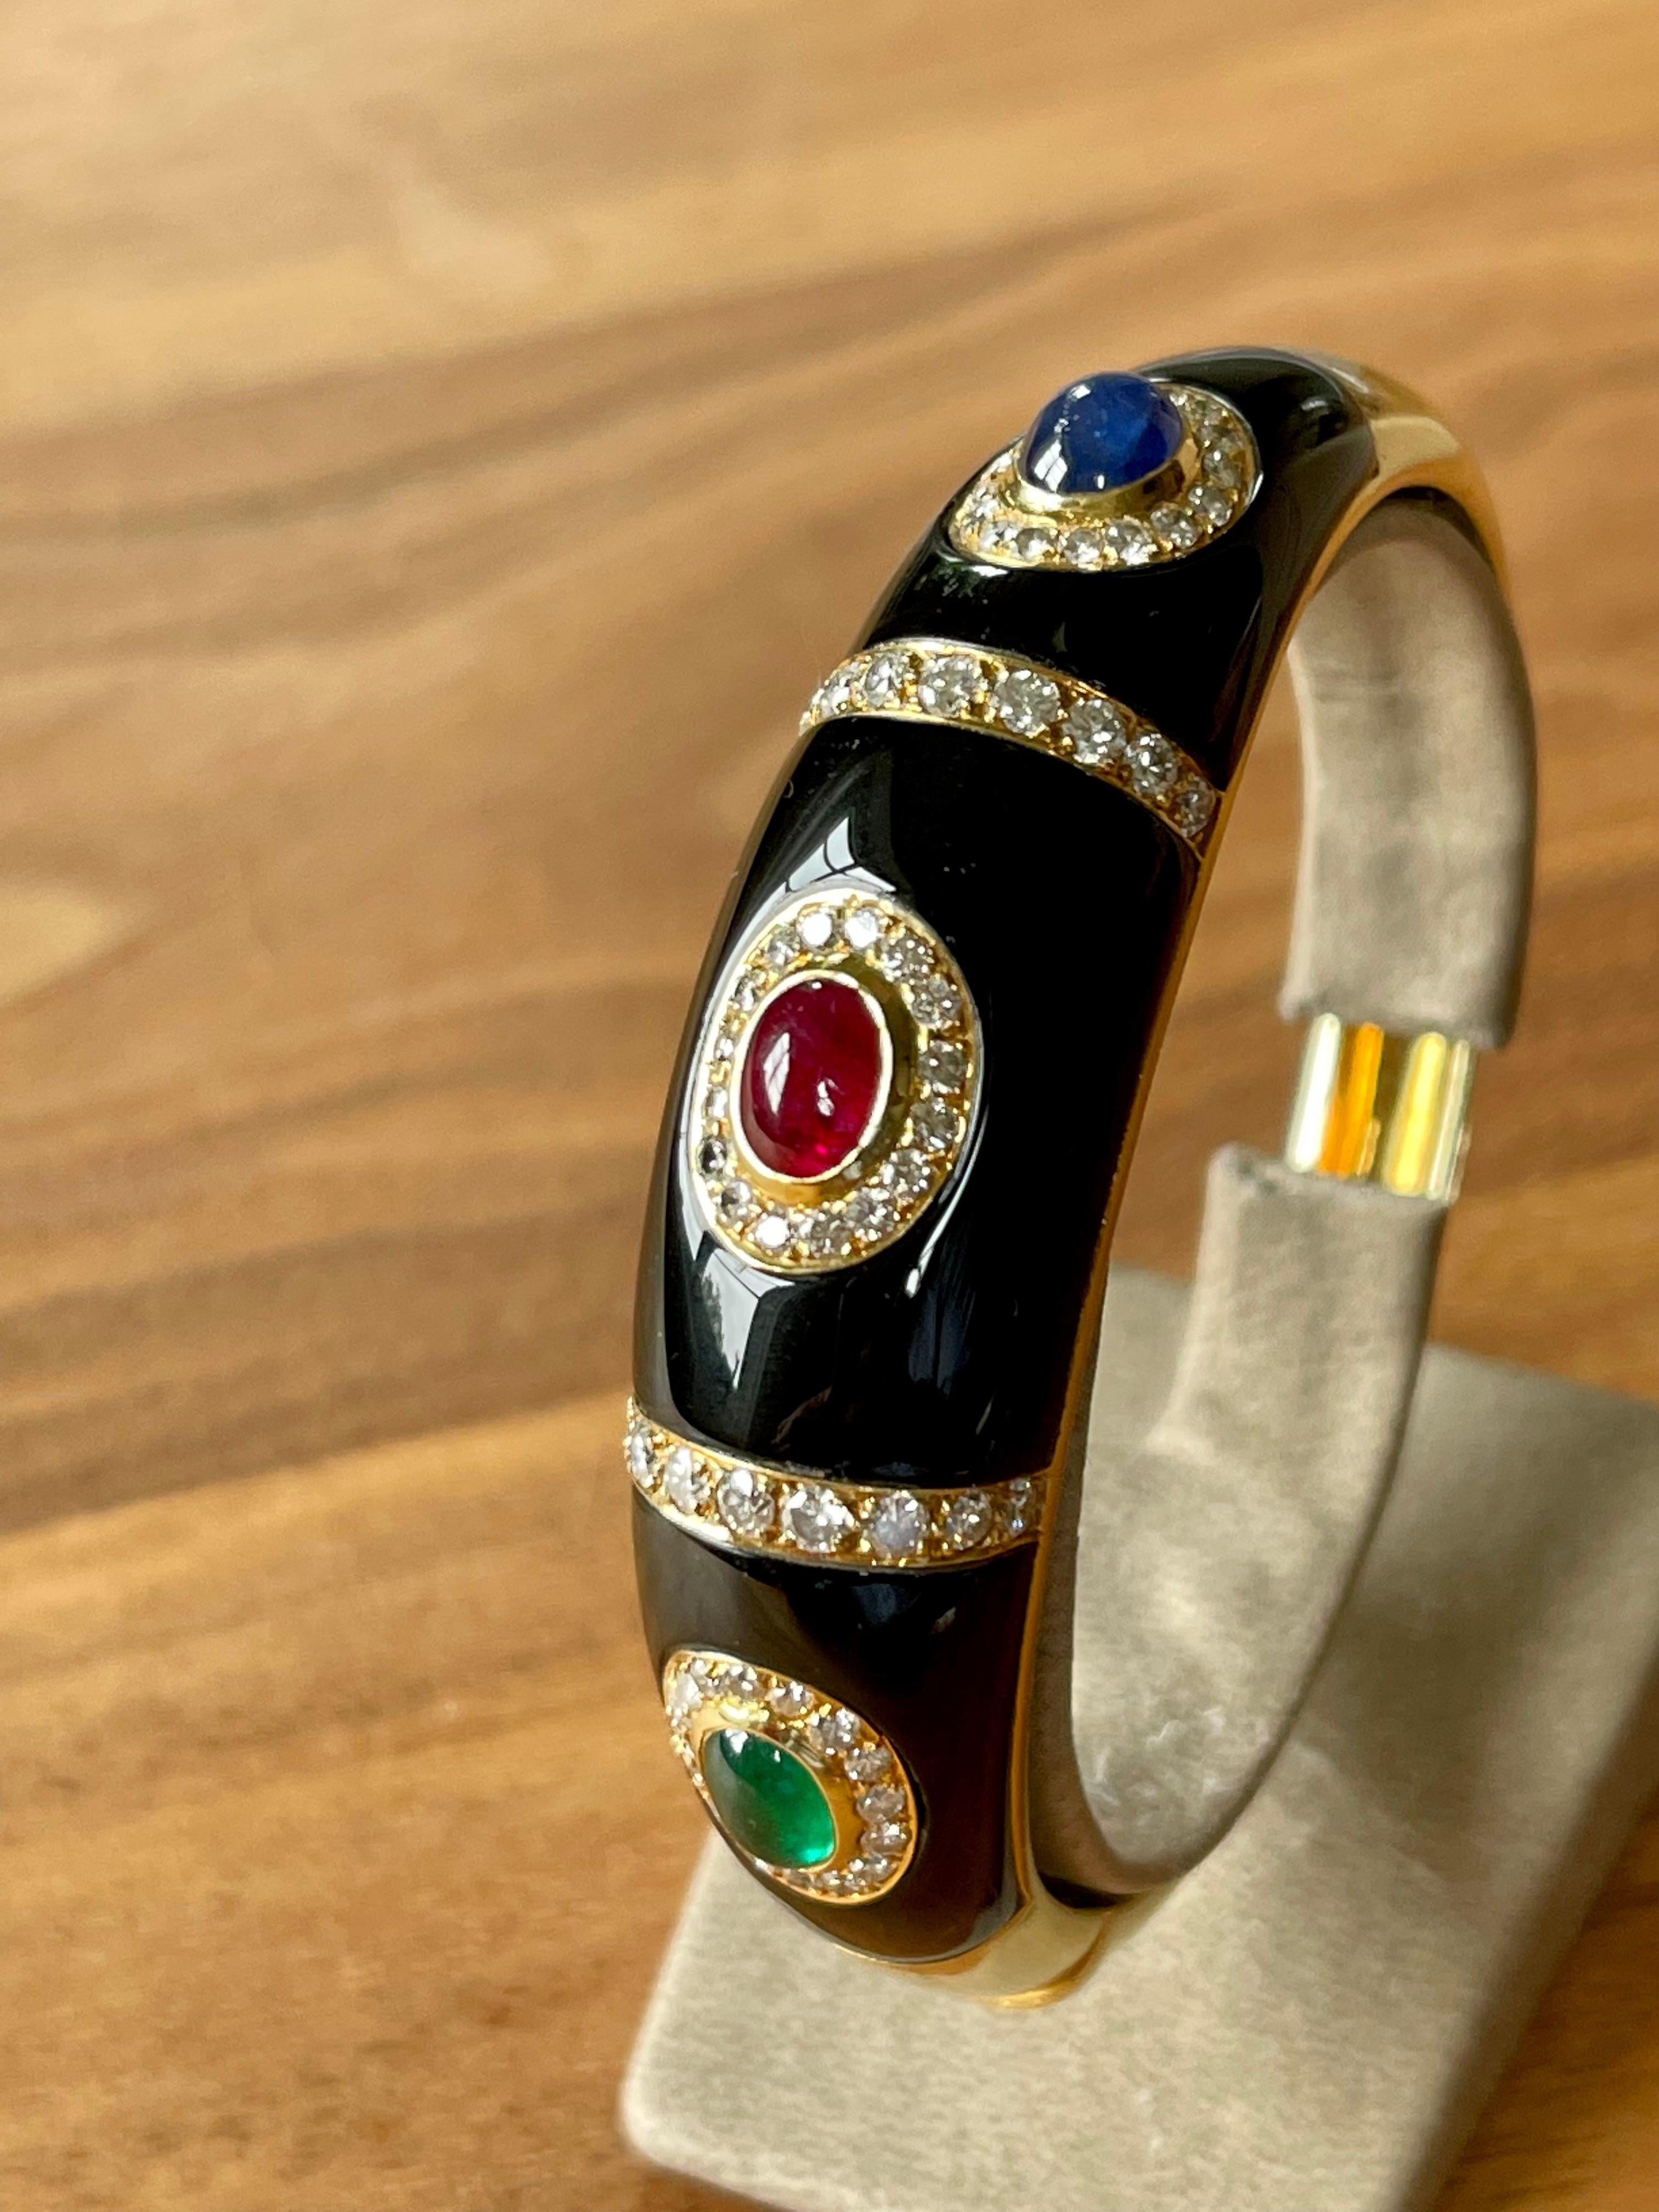 Stylish 1980's 18 K yellow Gold Bangle with black Enamel, Ruby, Sapphire and Emerald Cabochon accentuated by 75 brilliant cut Diamonds weighing ca. 1.80 ct. Diameter at the widest point 6 cm. 
Authenticity and money back is guaranteed.